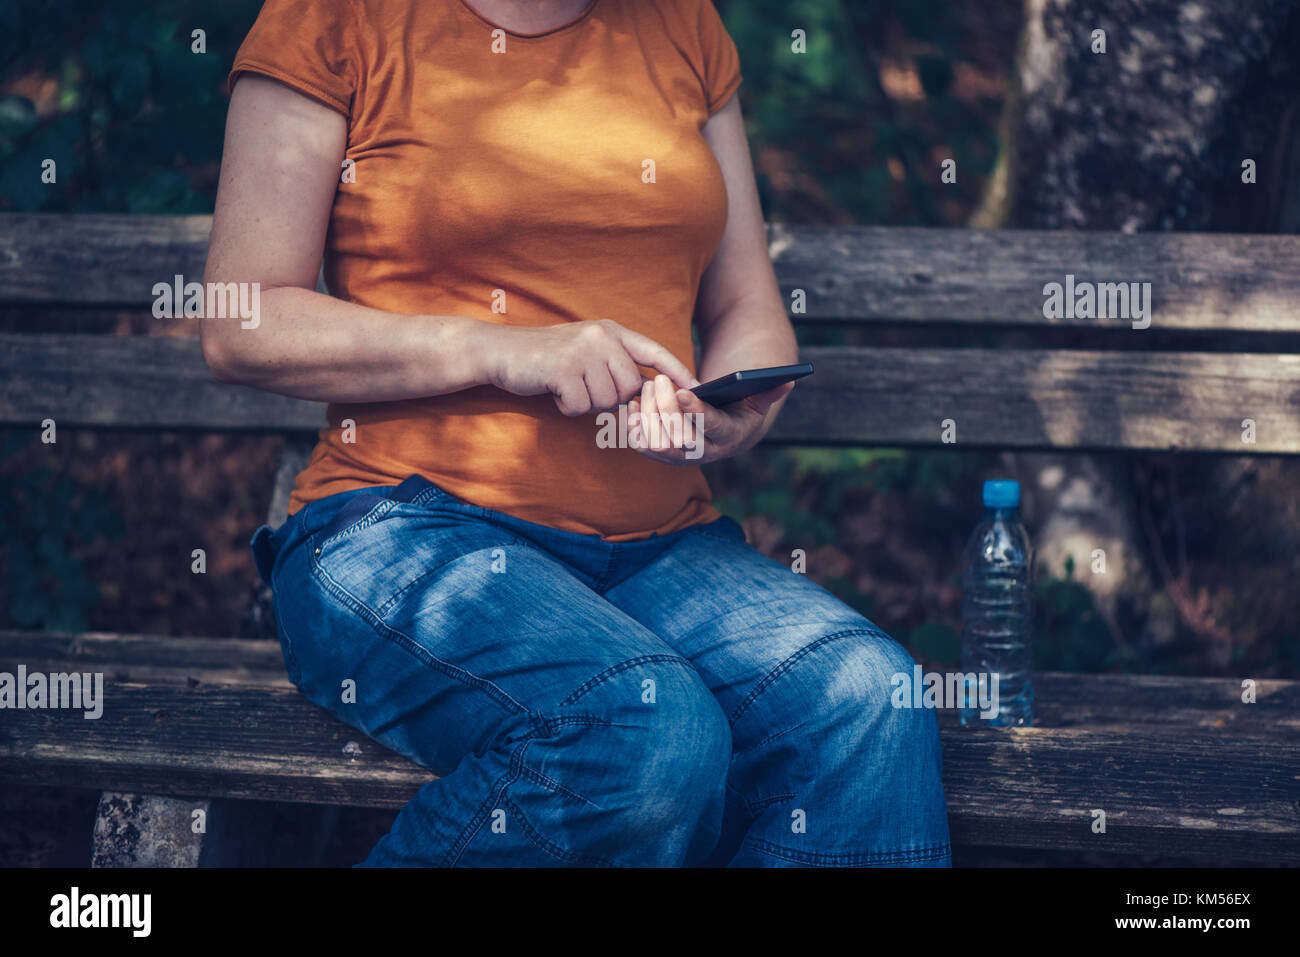 Pregnant woman texting outdoors on park bench, adult caucasian female using mobile phone during pregnancy Stock Photo